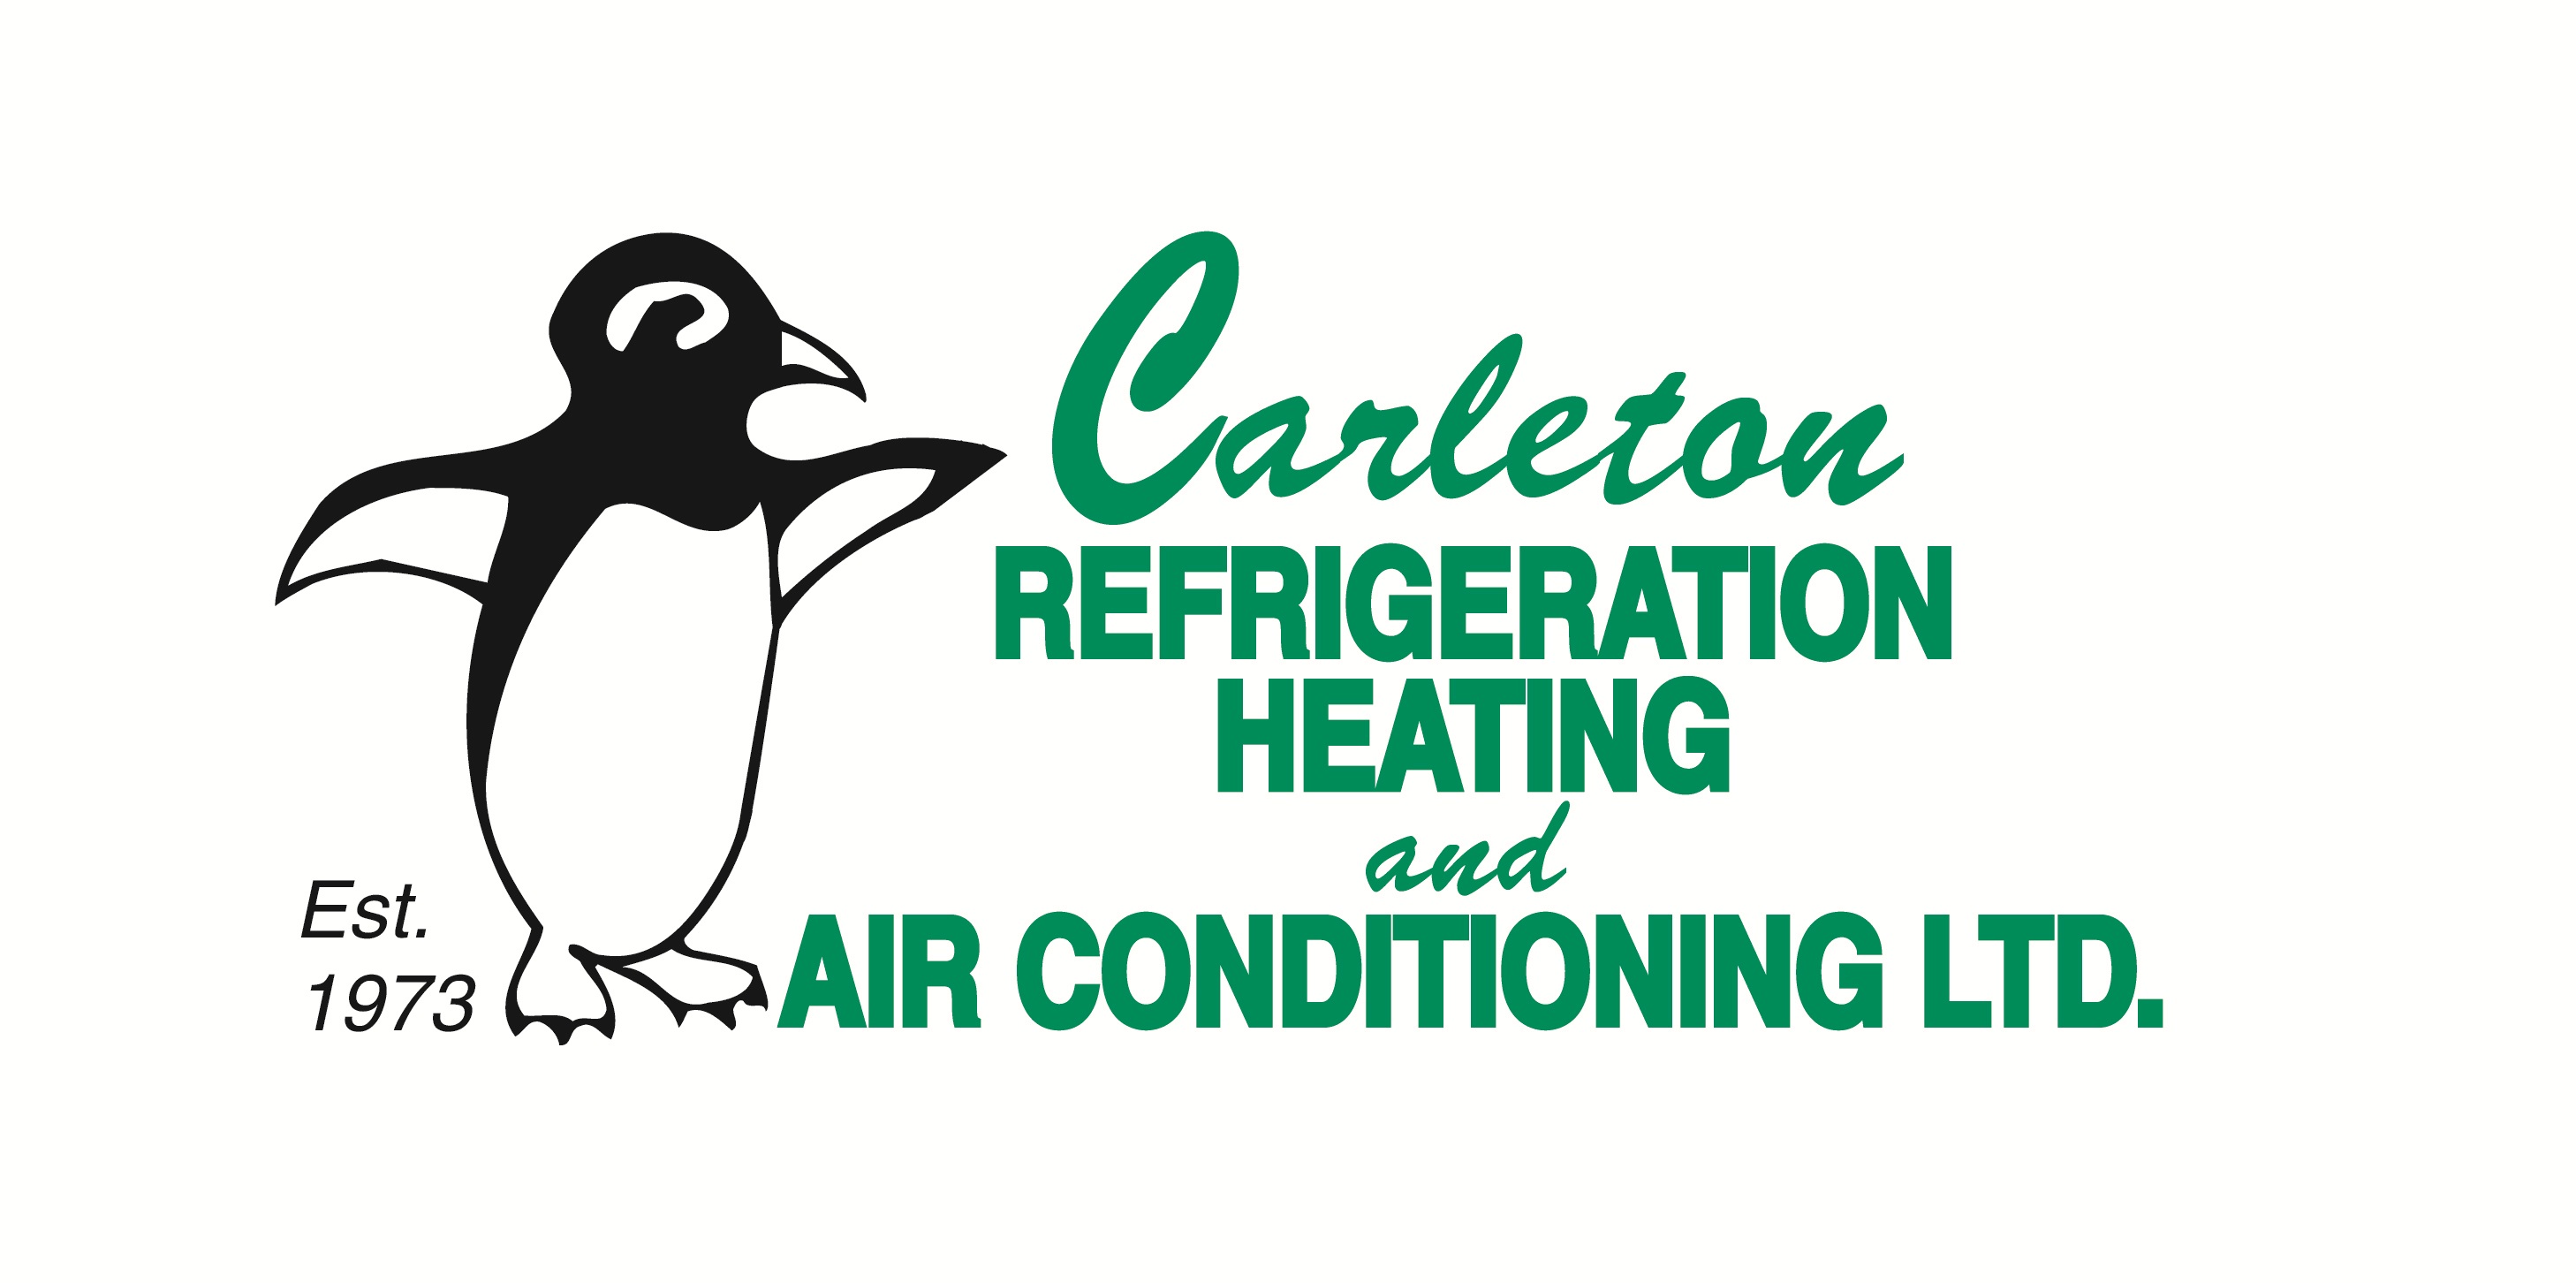 Carleton Refrigeration Heating and Air Conditioning